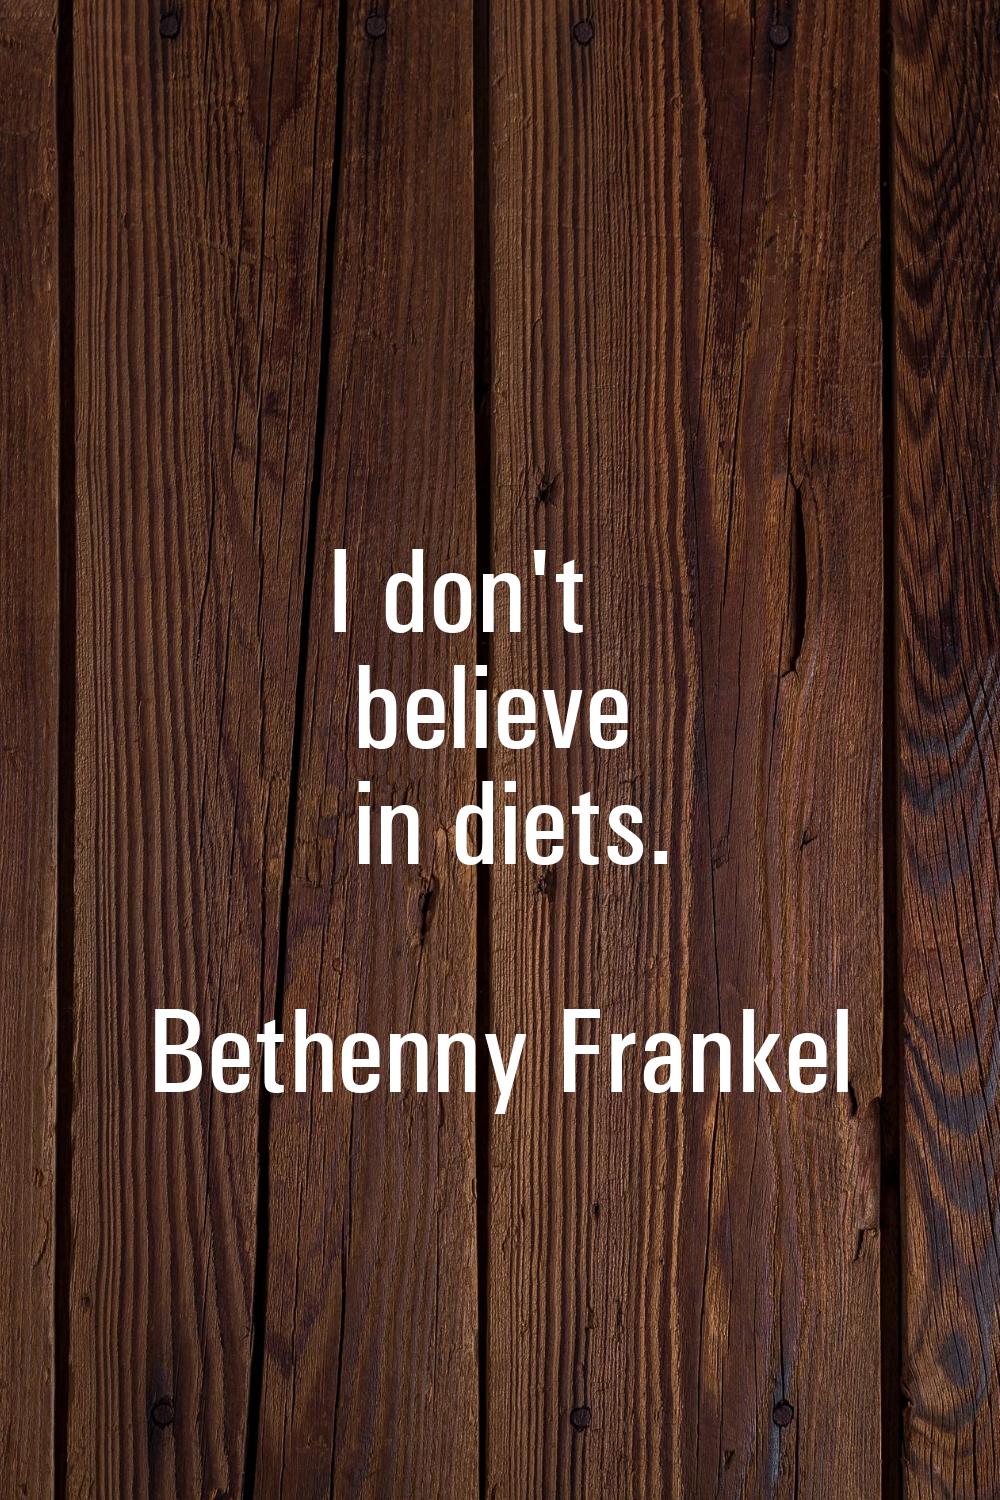 I don't believe in diets.